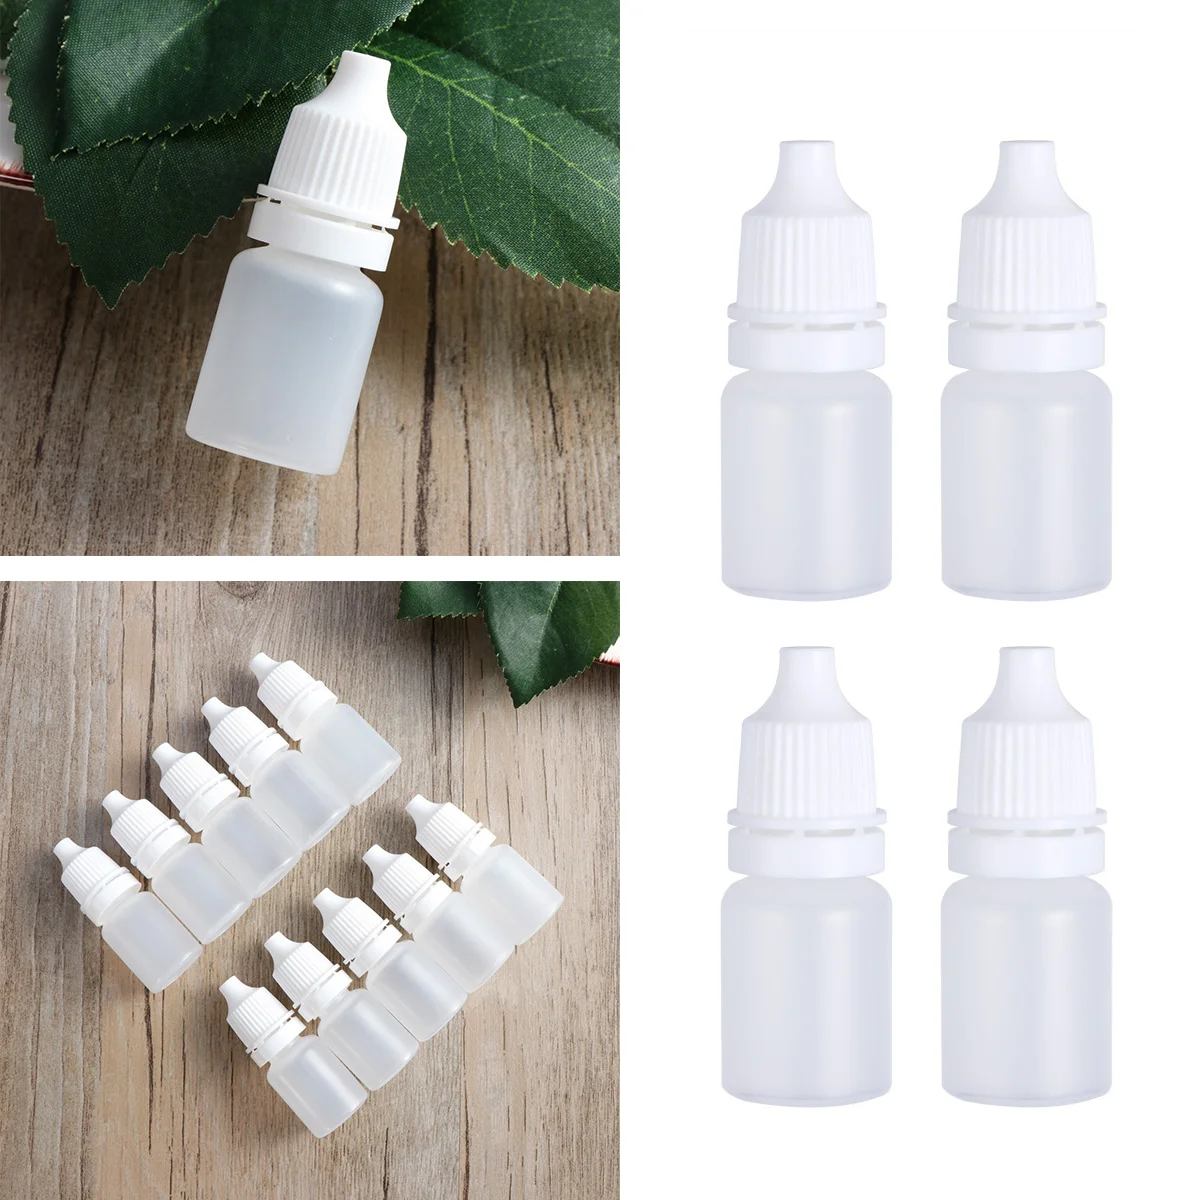 

30 Pcs Eye Liquid Dropper Bottle Squeezable Bottles Plastic Containers Filling Dropping Small